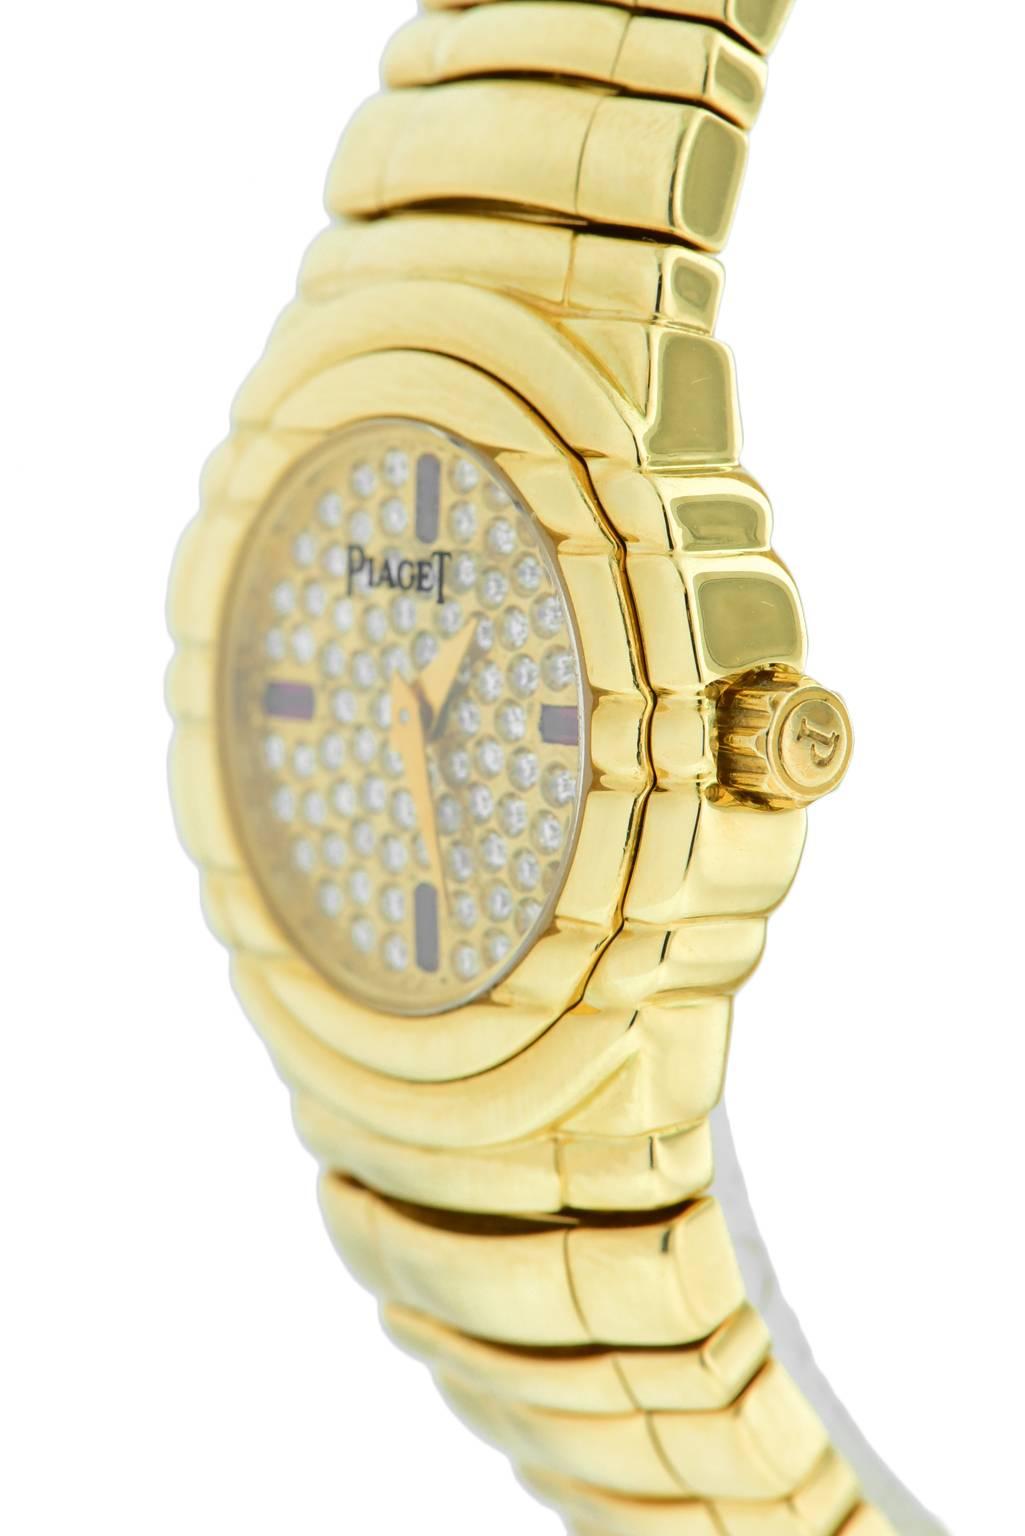 Ladies Piaget Tanagra, in 18K Yellow Gold With factory Diamond pave dial and Stup cut ruby hour markers. On 18K Yellow Gold Bracelet with double folding hidden clasp. 25 mm case. Quartz movement. watch fits up to 6 1/2